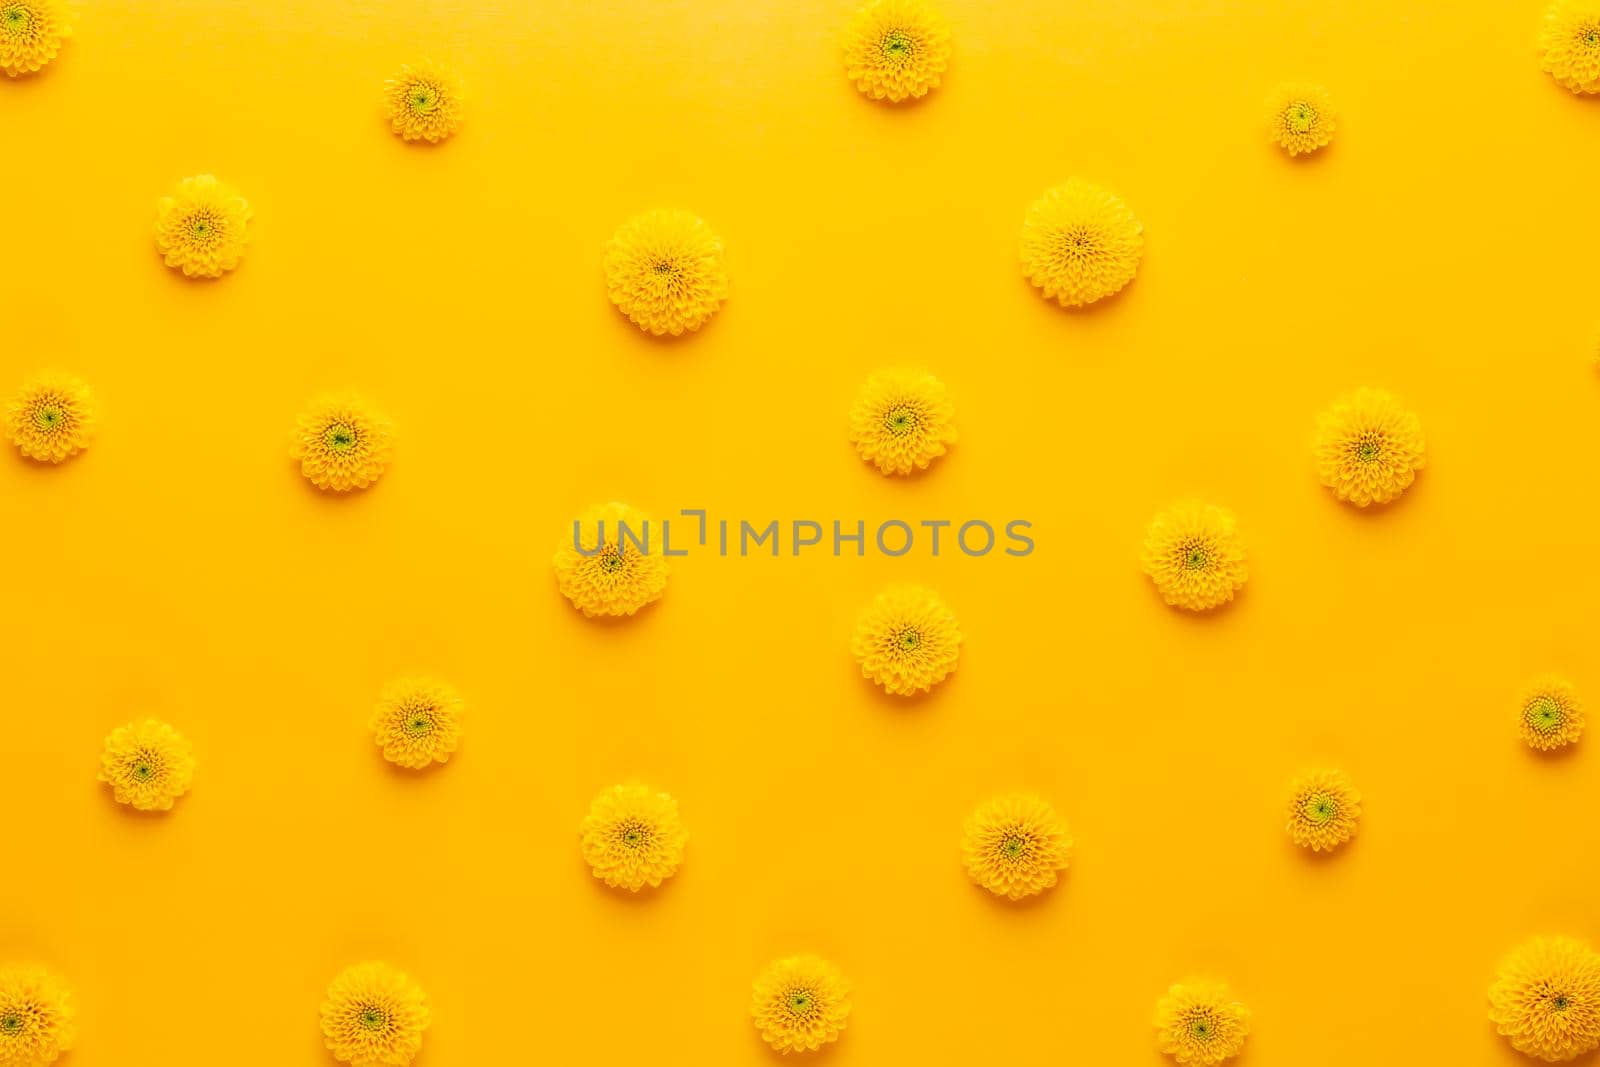 Yellow flower pattern on a yellow background. Gerbera spring flowers arranged on a vivid background. Top view. Flat lay. Valentine's background. Floral pattern.  The concept of summer, spring, Mother's Day, March 8